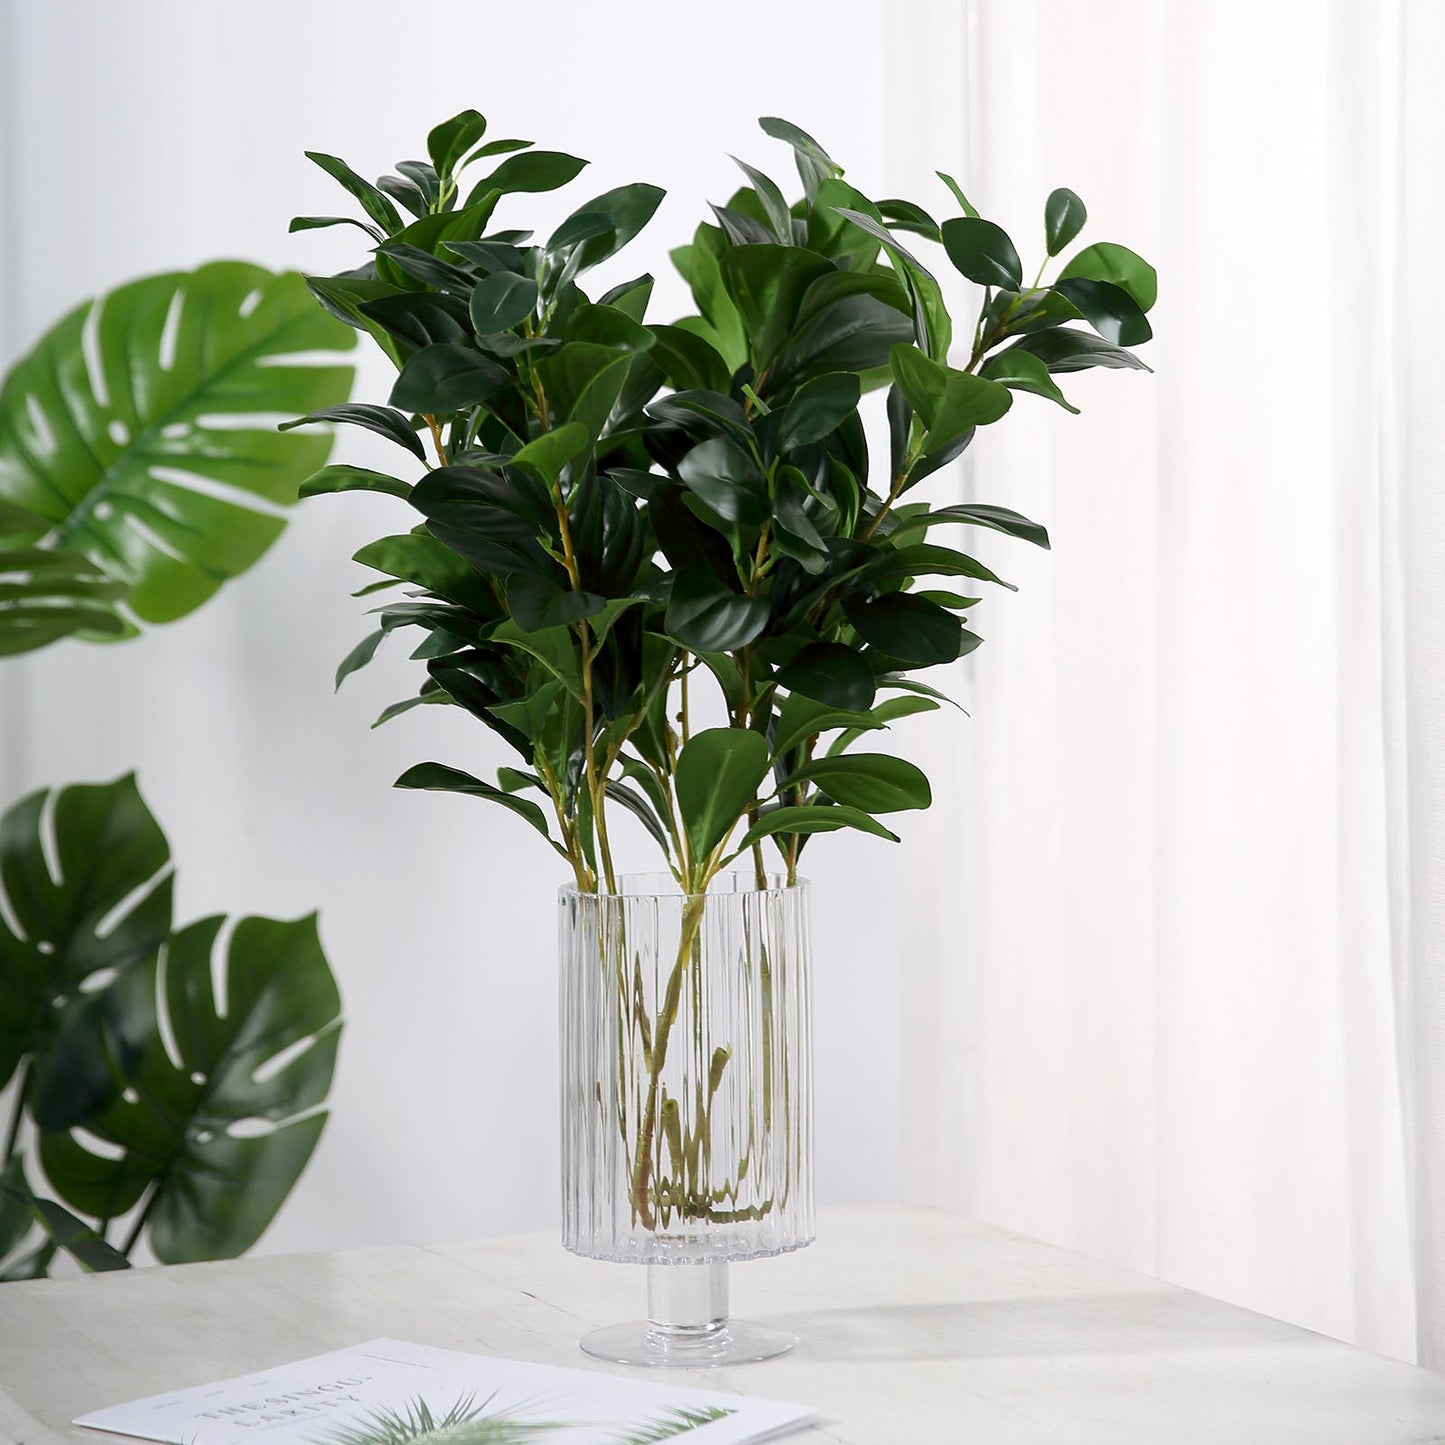 2 Stems Green Artificial Lemon Leaf Branches Faux Greenery Plant 26"